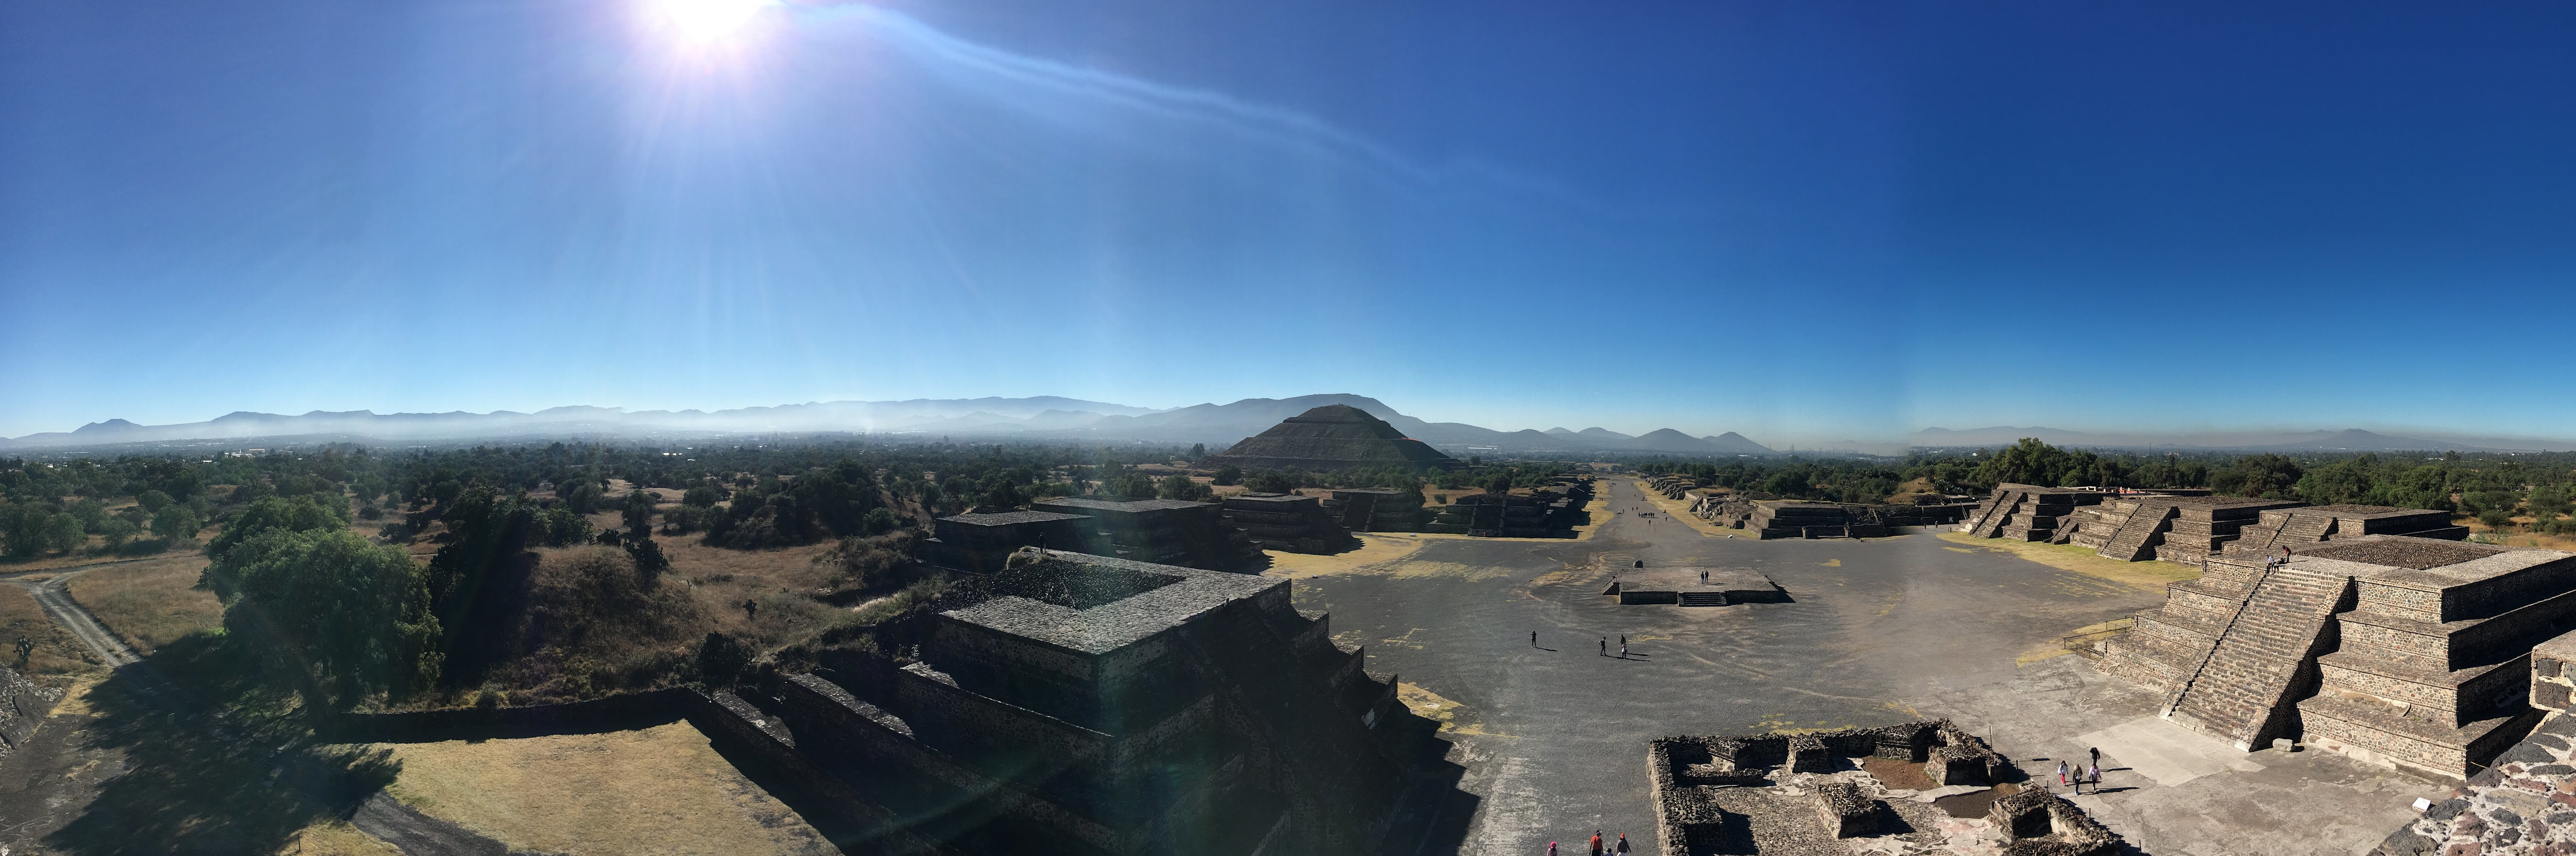 The Teotihuacan pyramids